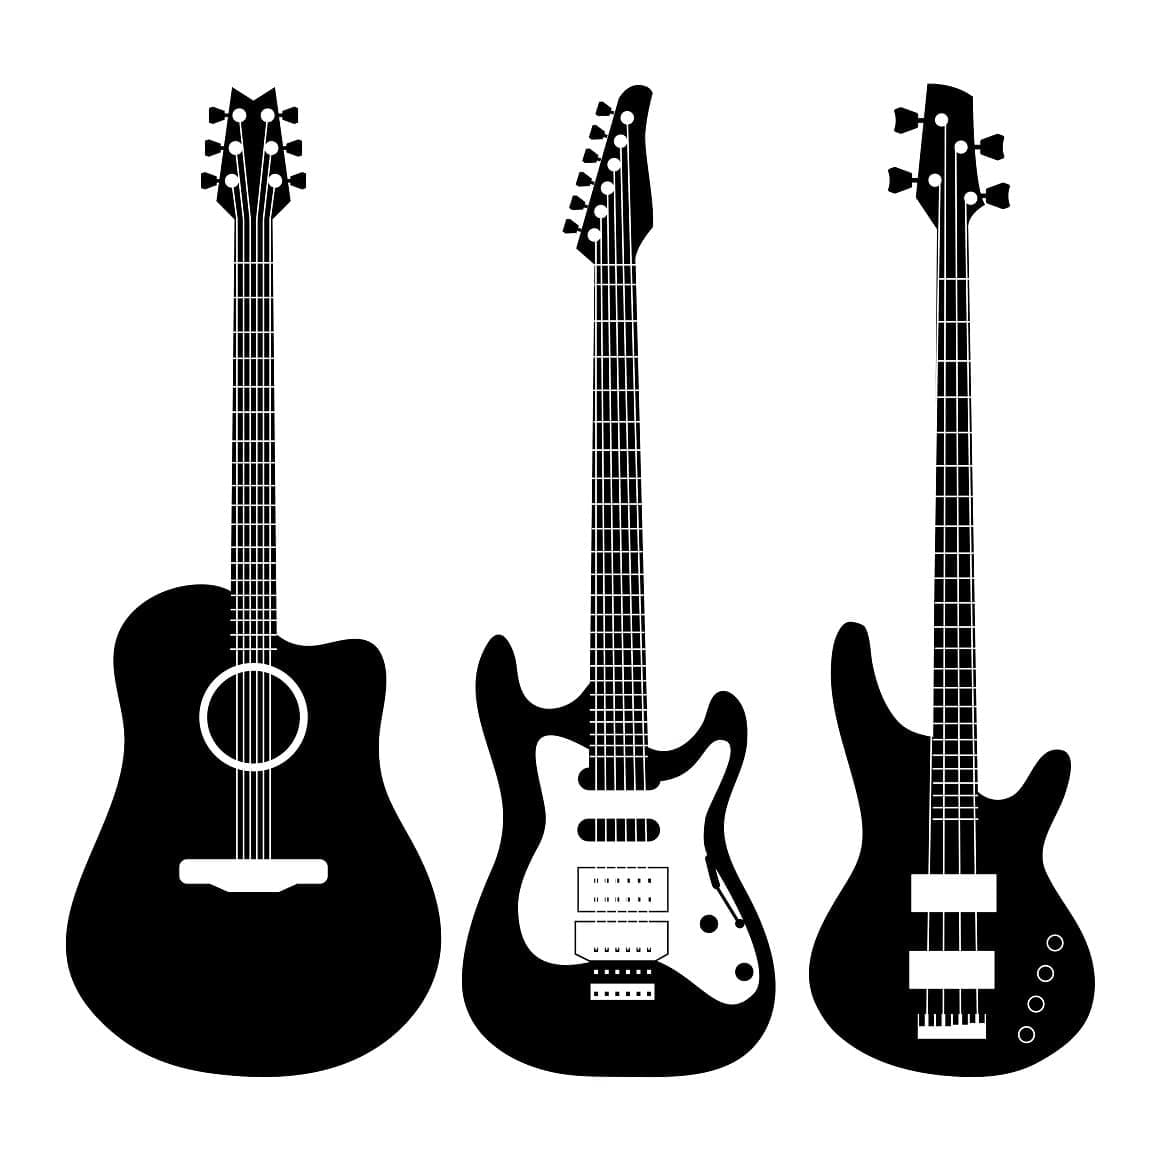 Black and white guitars from acoustic to electric guitar.